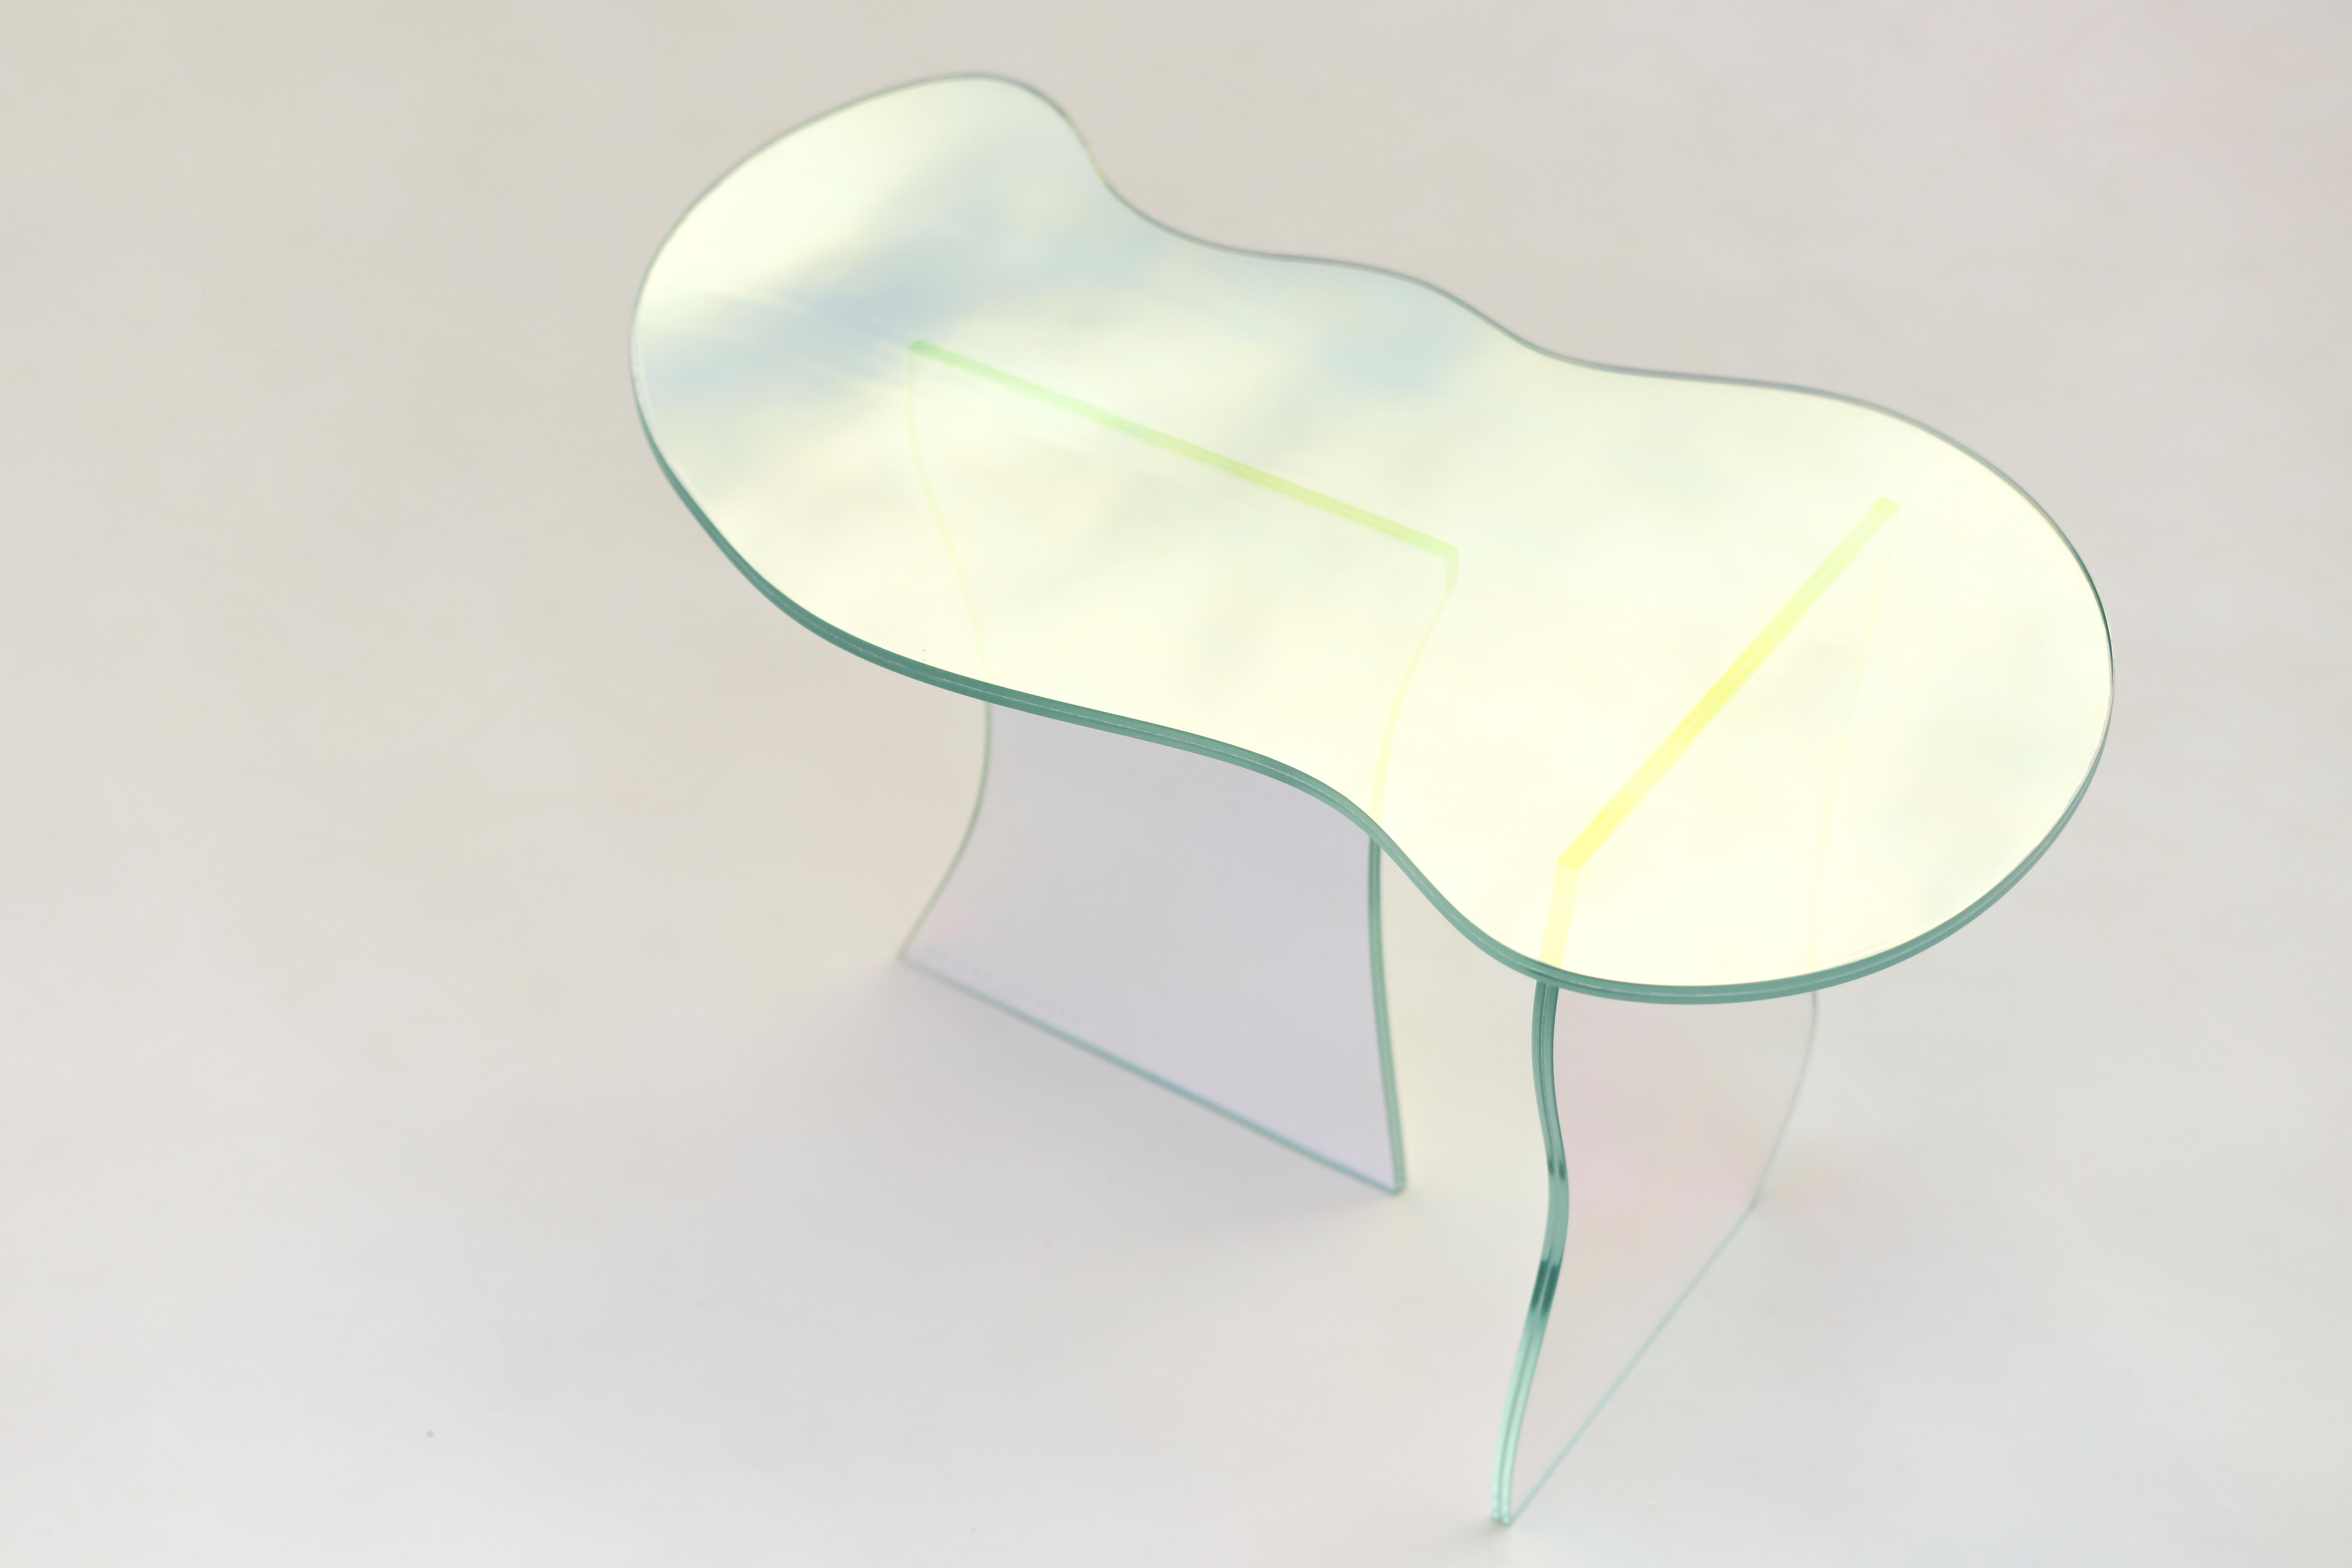 Glass table by Brajak Vitberg
Materials: Glass, Dichroic film
Dimensions: 77 x 43 x 40 cm

Bijelic and Brajak are two architects from Ljubljana, Slovenia.
They are striving to design craft elements and make them timeless through experimental